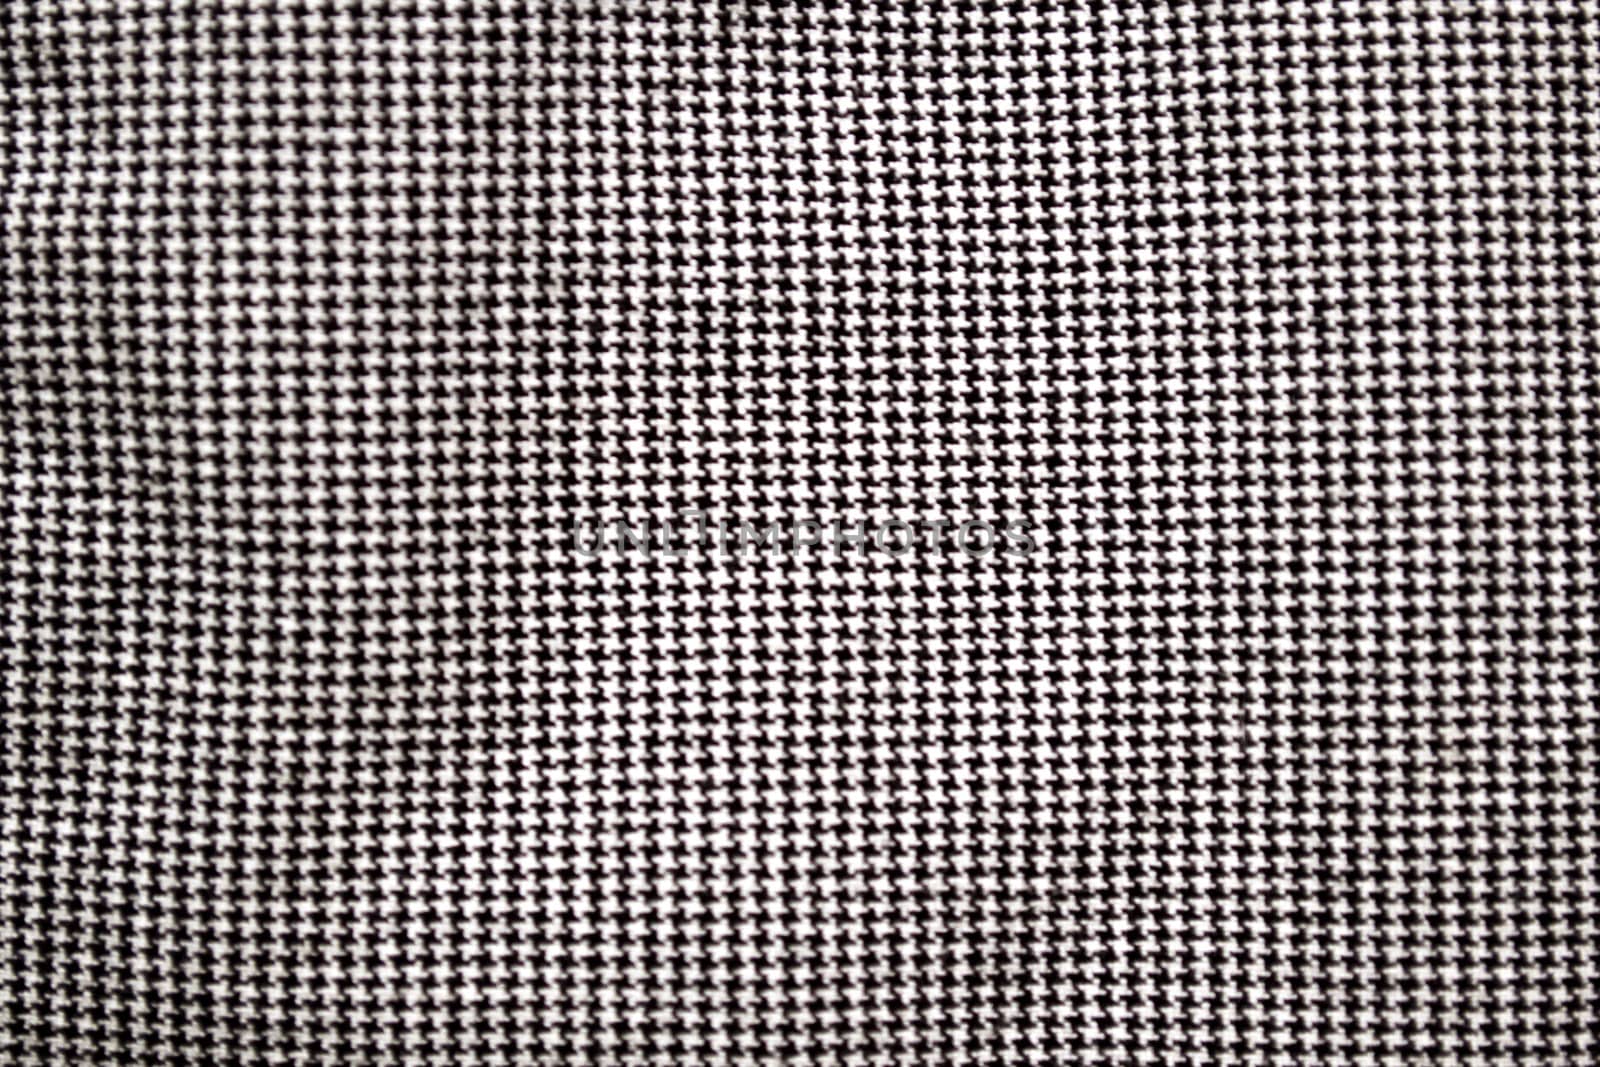 Black and white dog tooth pattern background